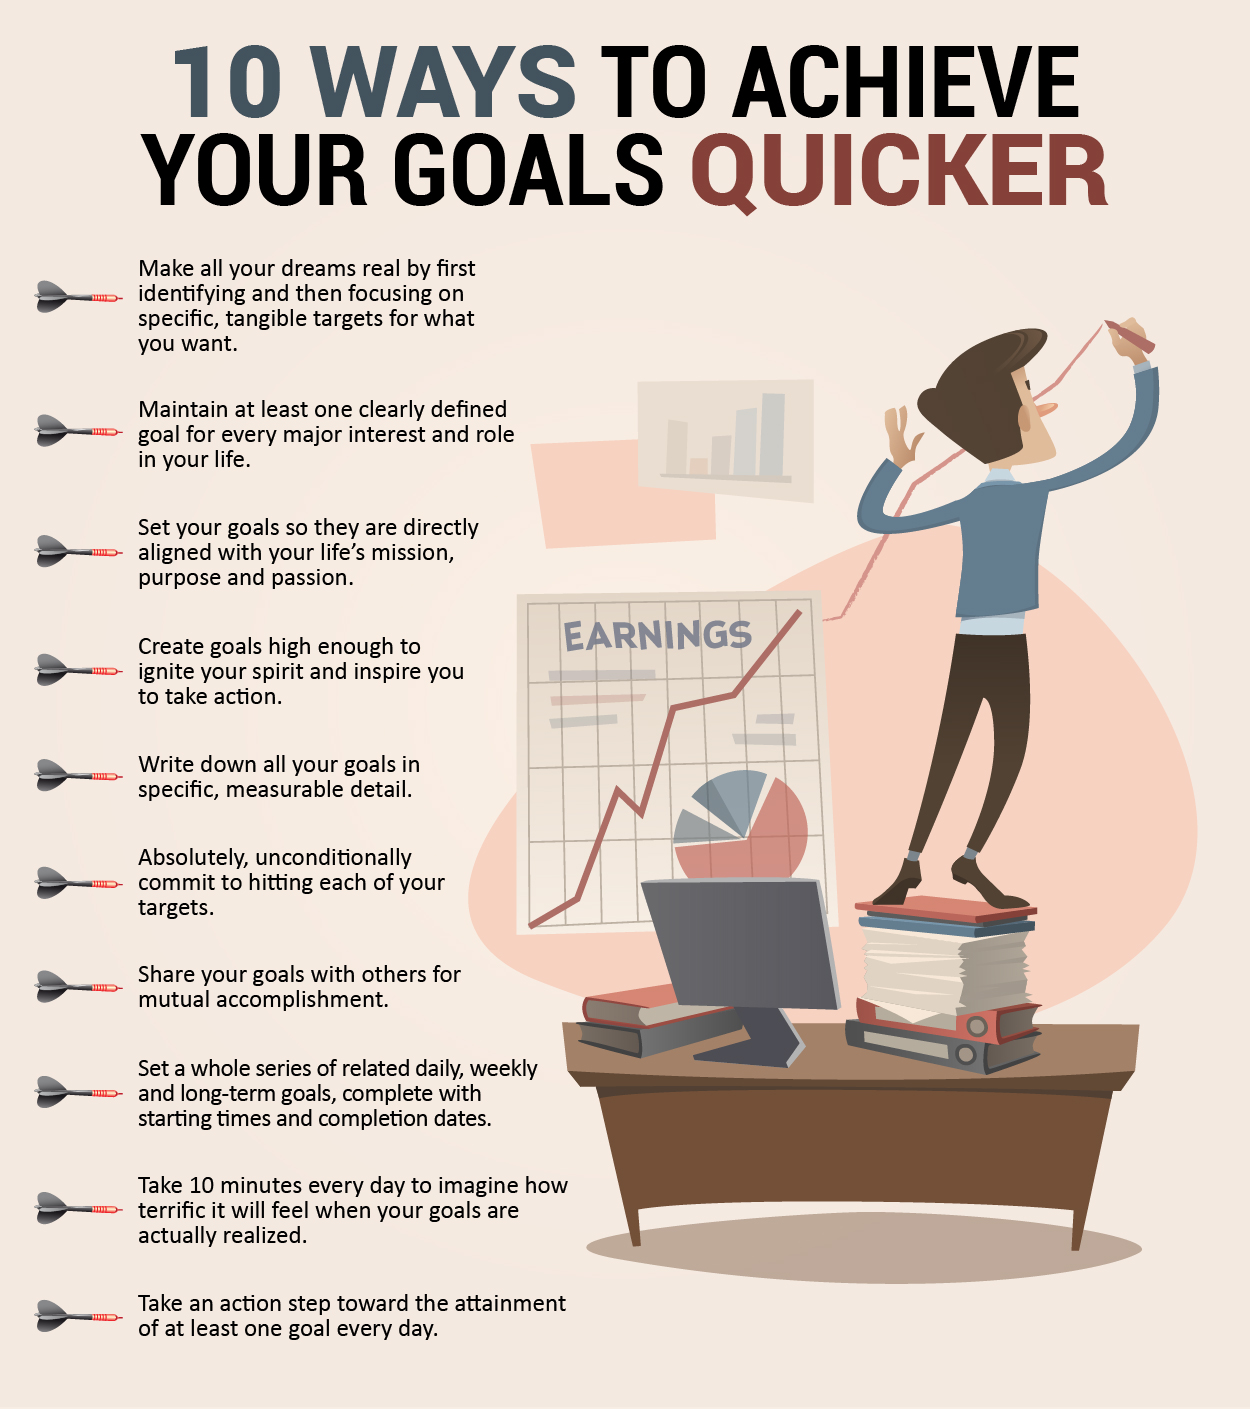 Setting Small Goals: How Aiming Low Will Help You Reach Your